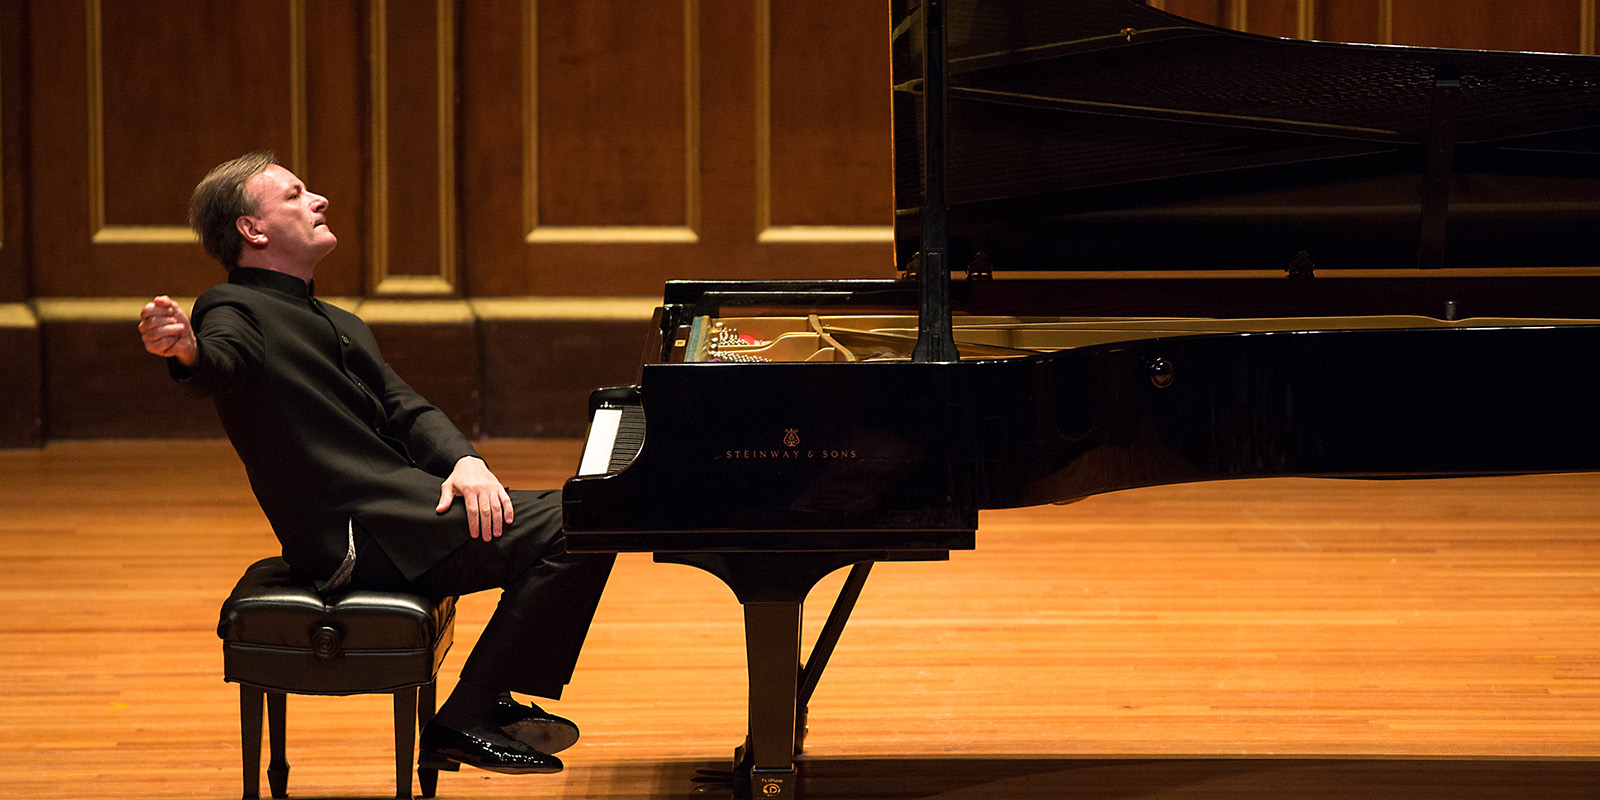 Virtuoso Pianist and Composer Stephen Hough To Make Athens Debut April 2